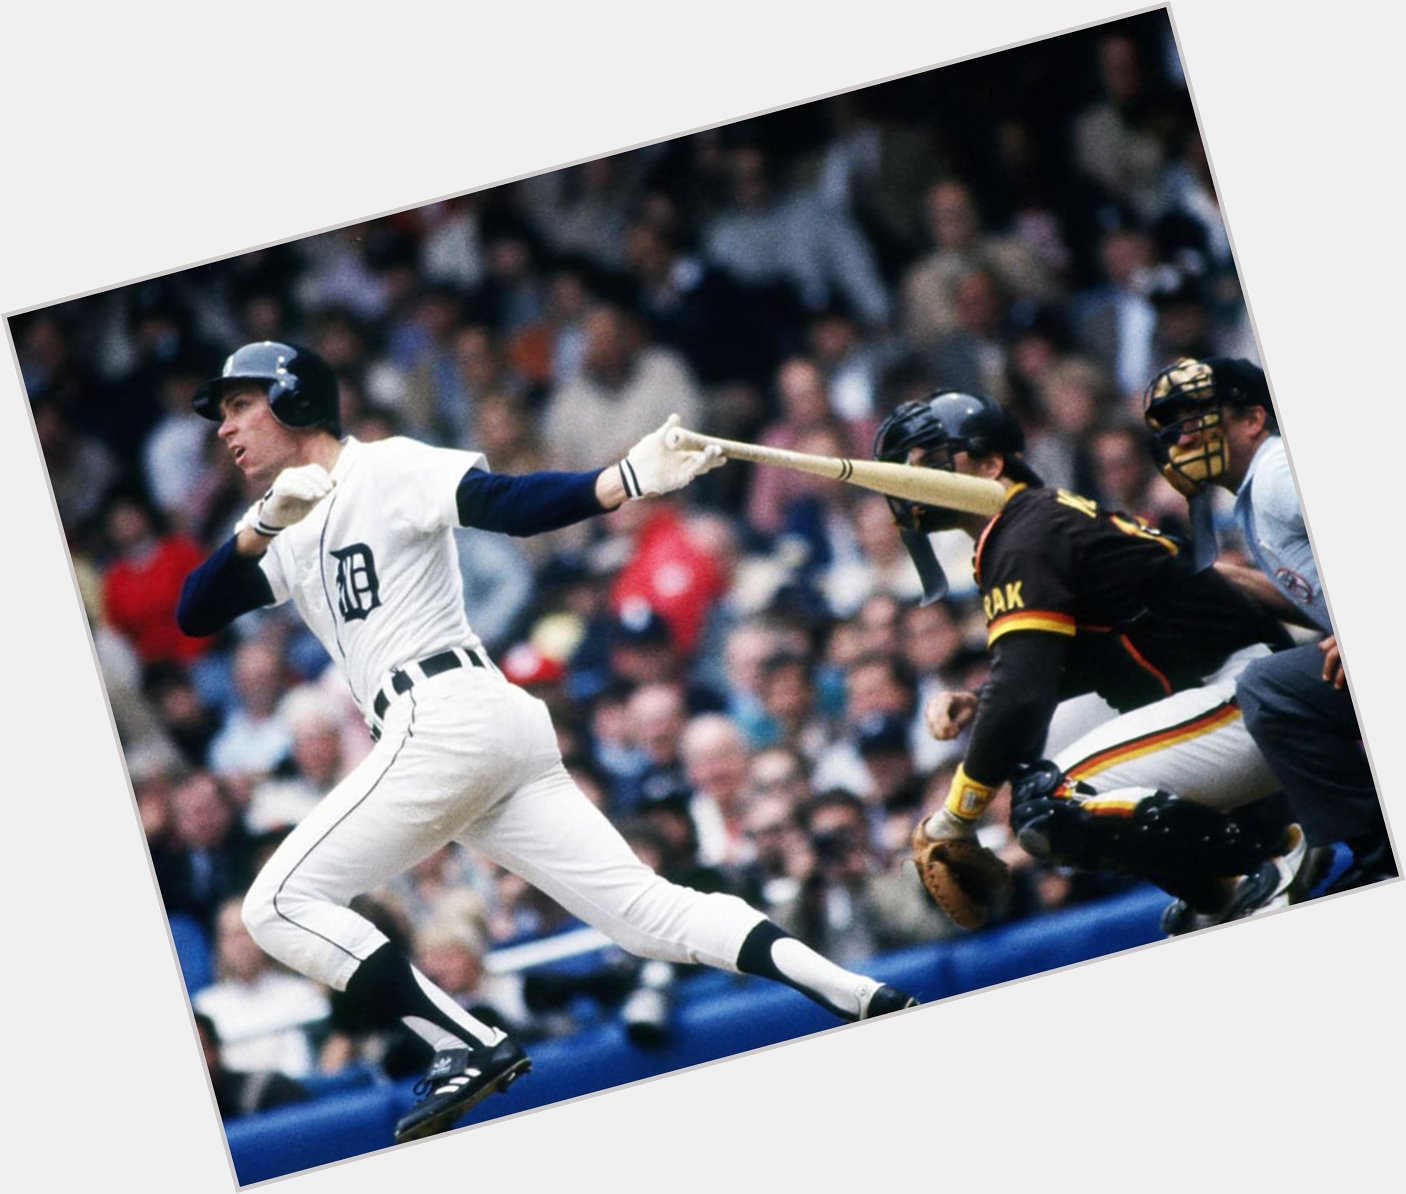 Happy 65th birthday to the great Alan Trammell! 